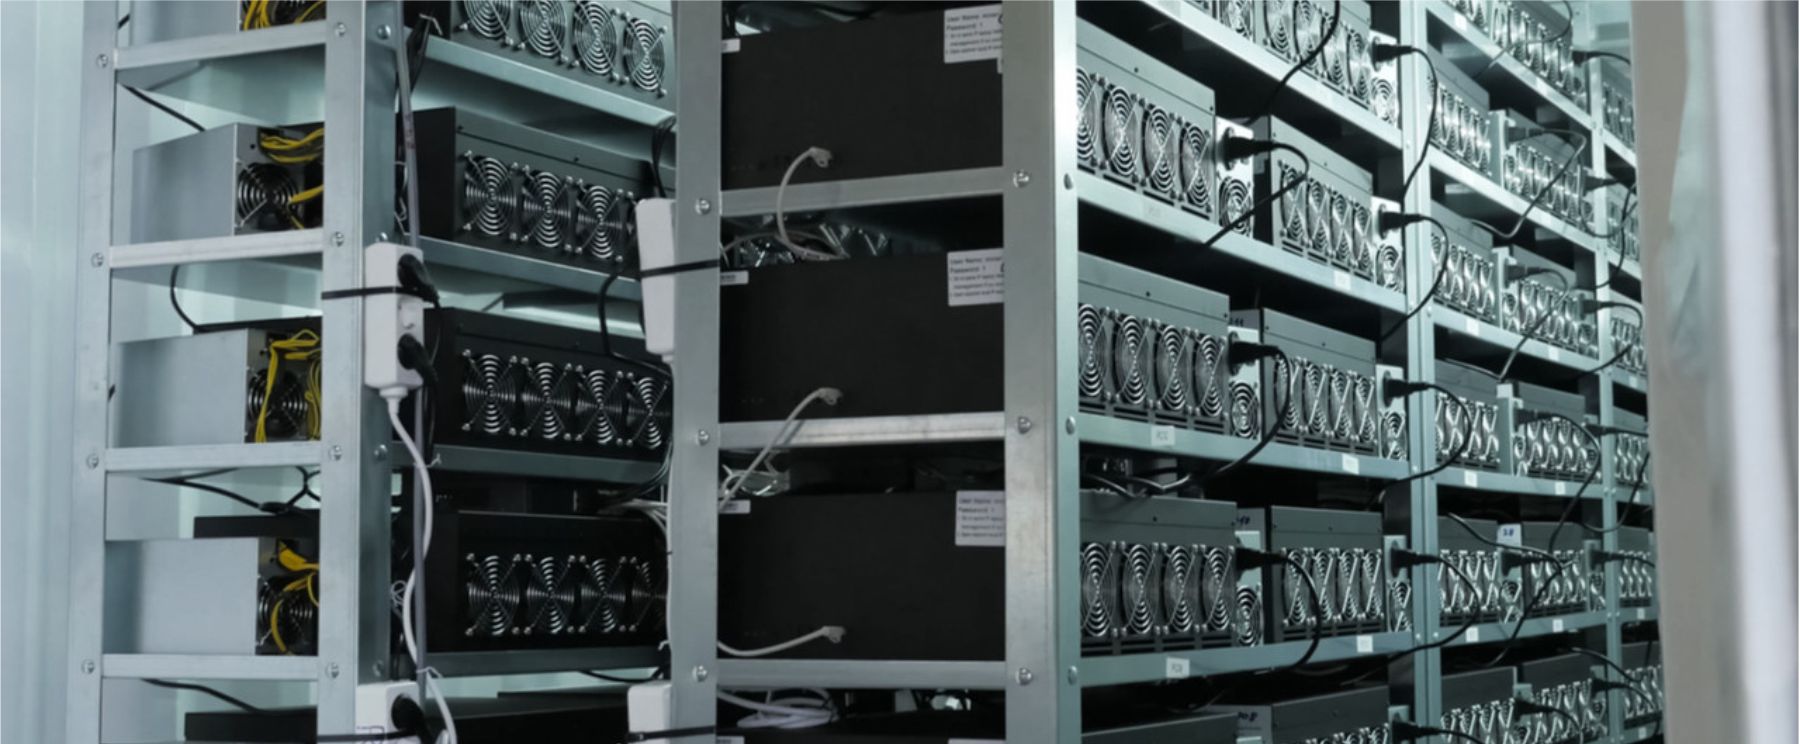 Two racks on which a large number of cryptocurrency rigs have been placed